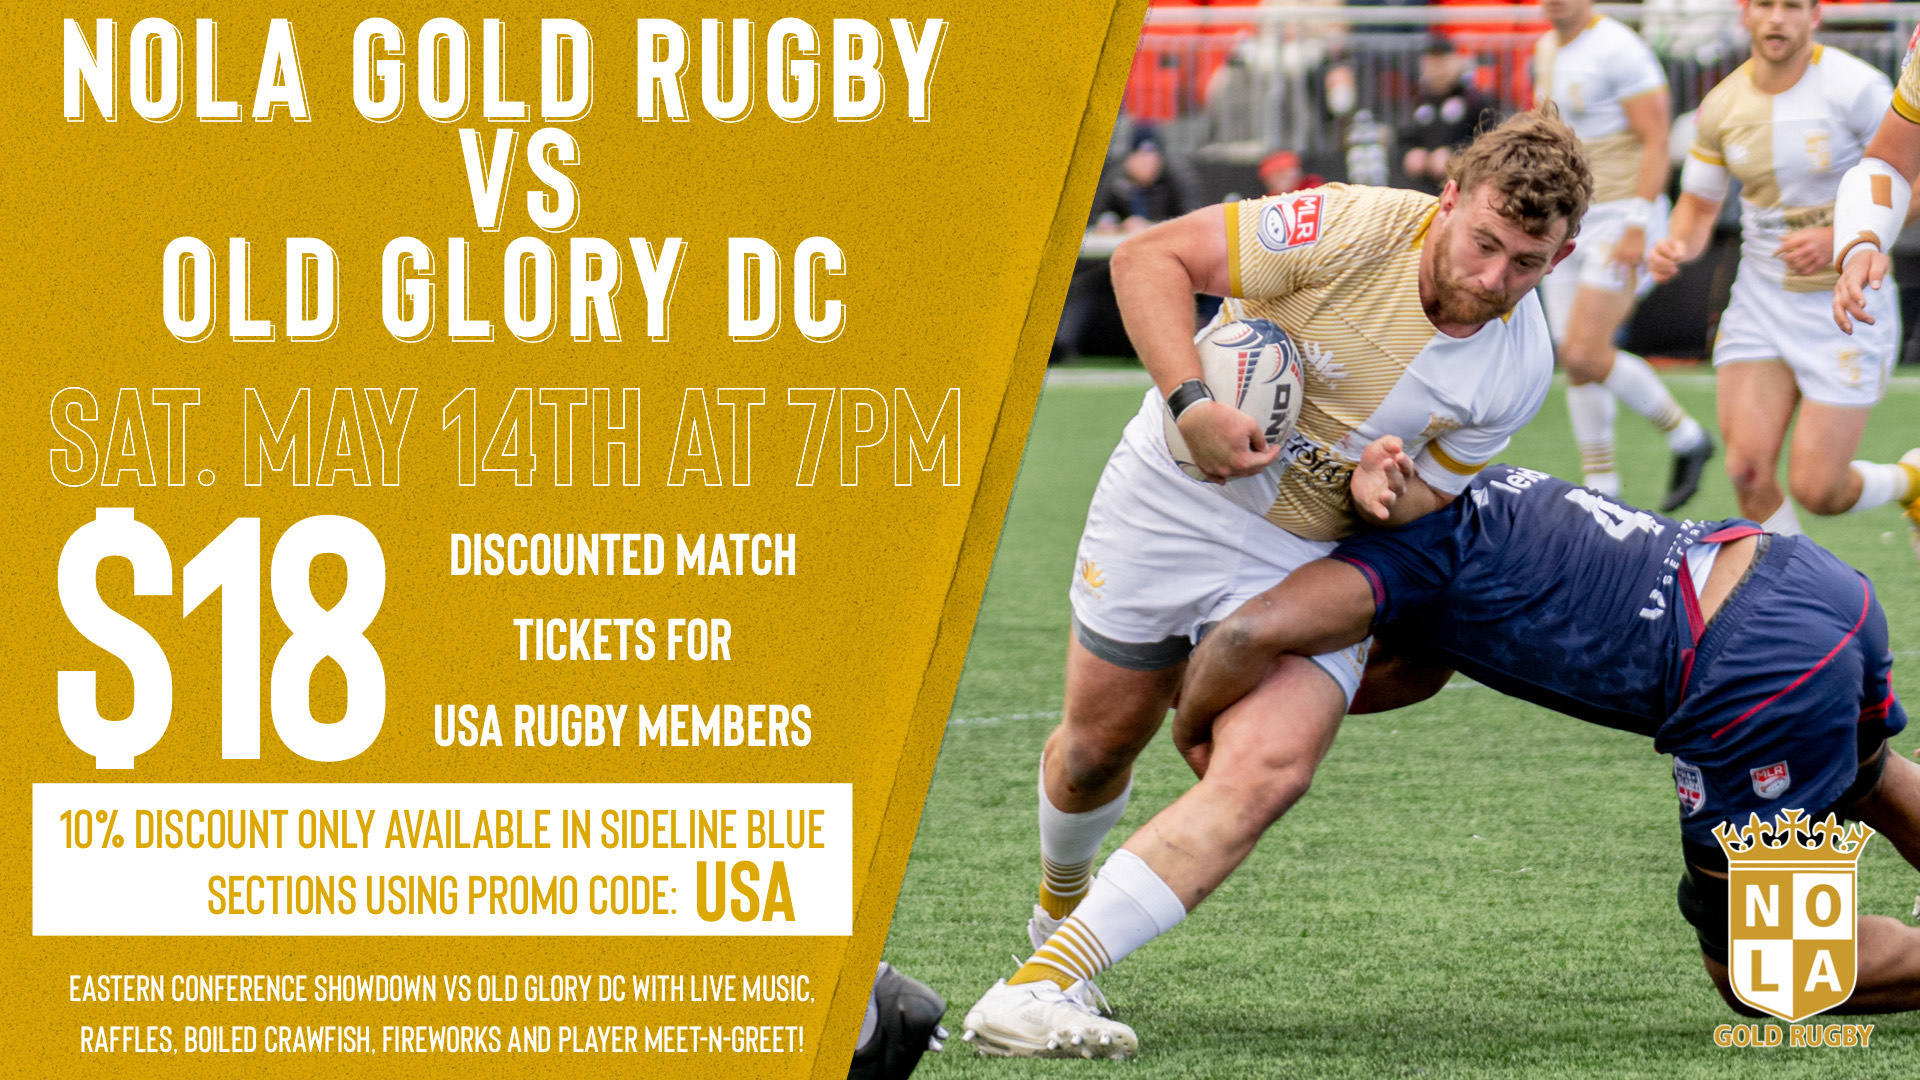 Next Home Game May14th vs Old Glory DC at 7PM